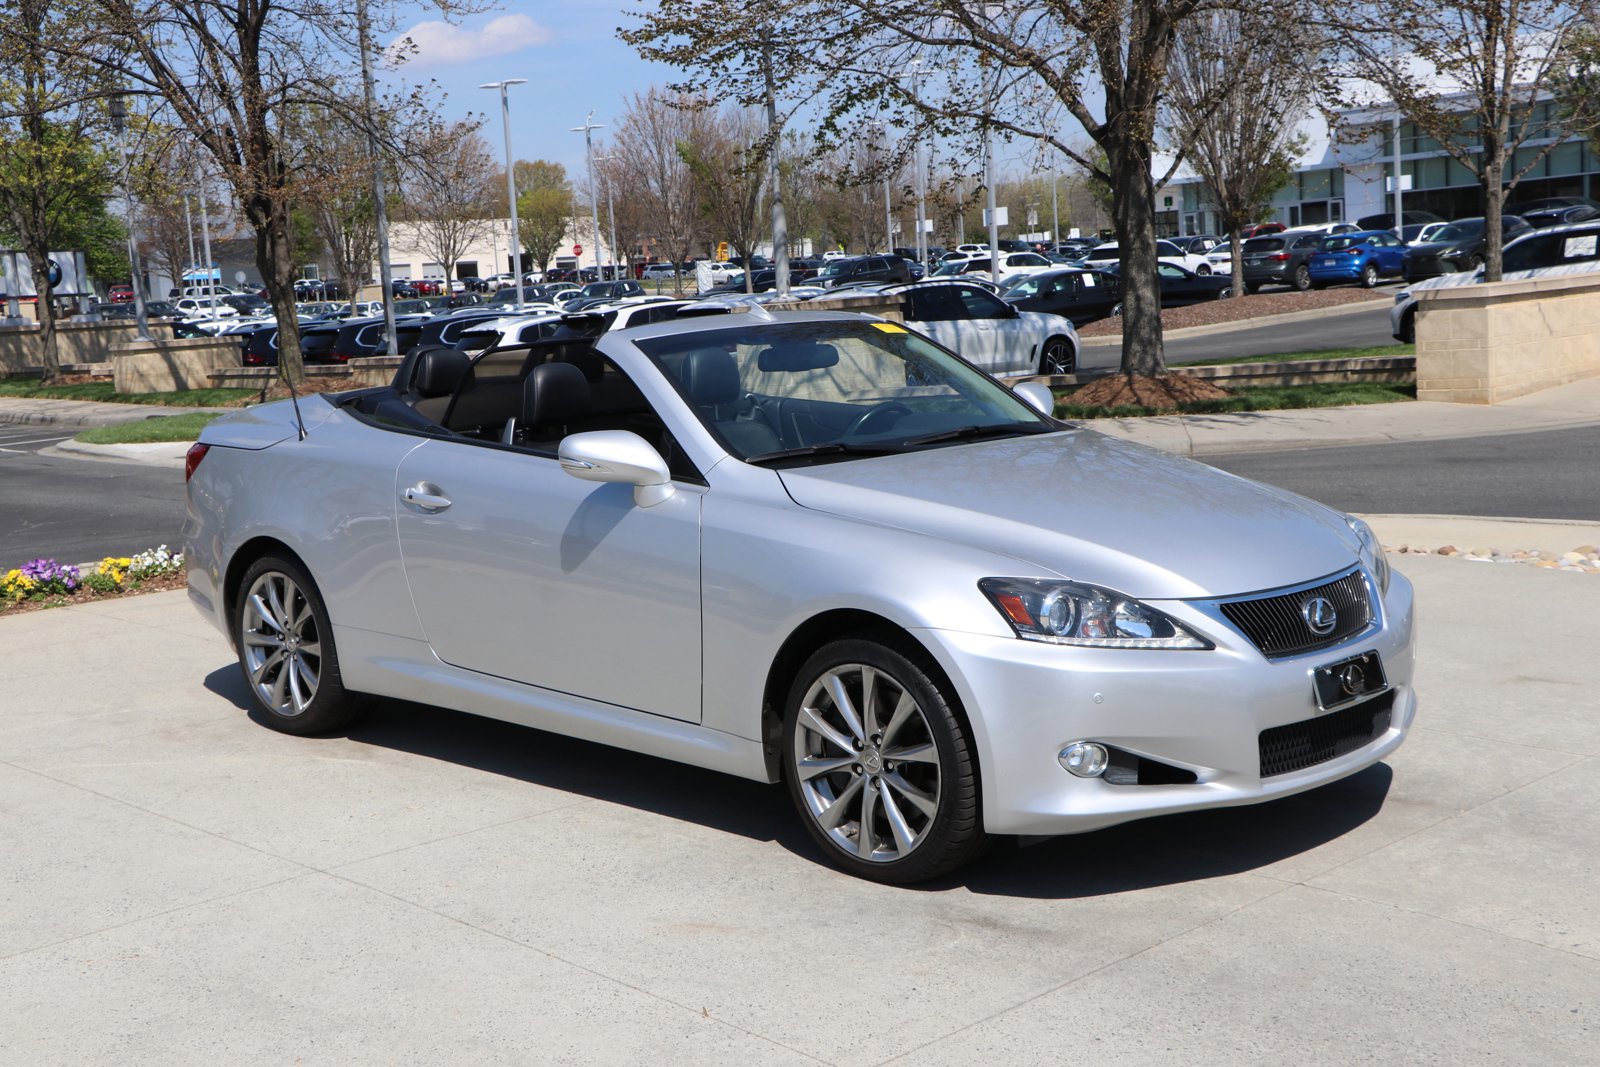 Pre-Owned 2013 Lexus IS 350C 2dr Conv Convertible in Cary #PSN2764 |  Hendrick Dodge Cary